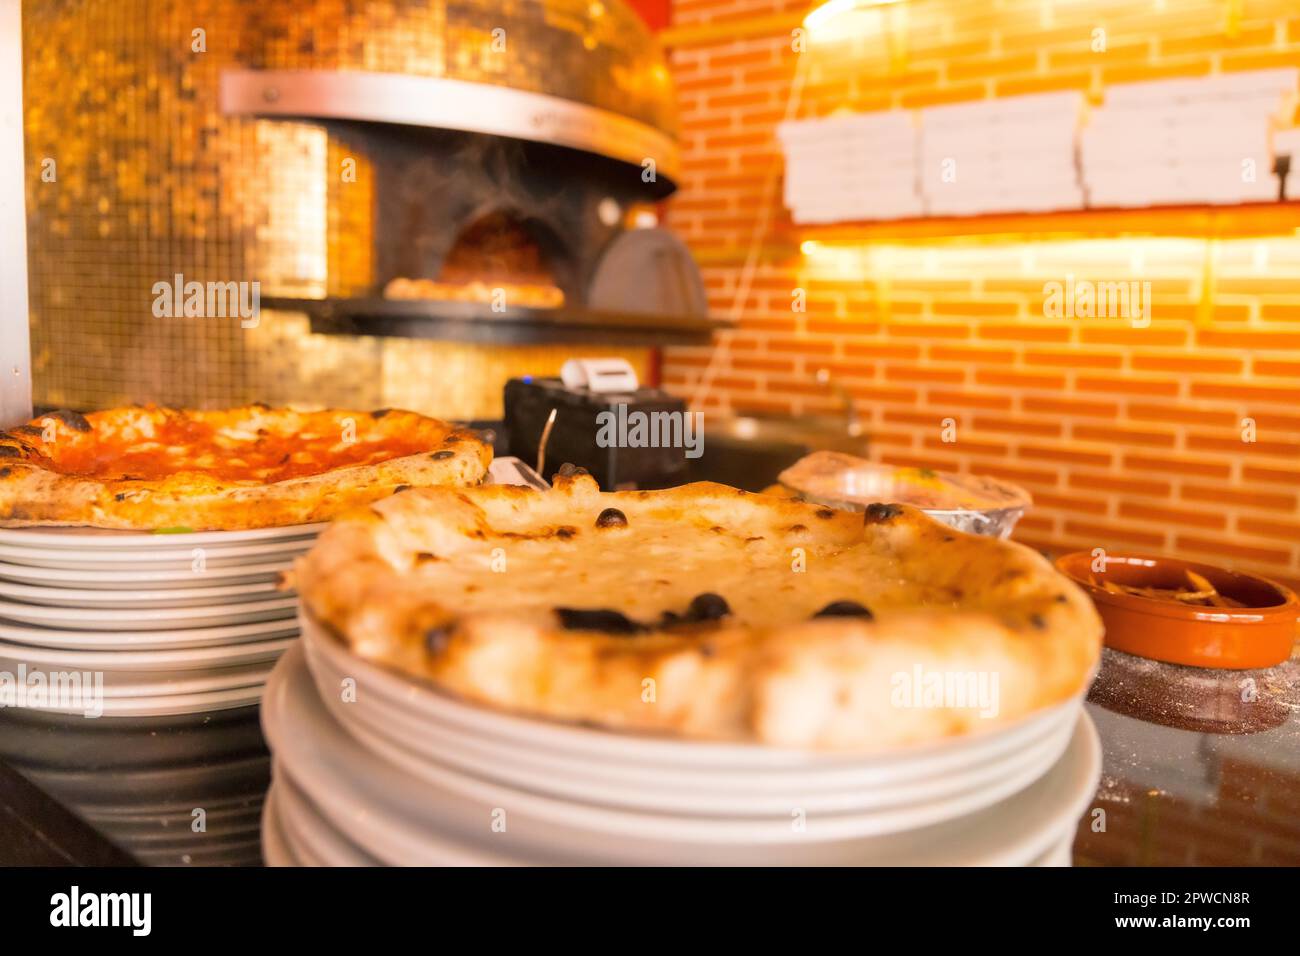 Artisan pizza oven. Freshly made pizza coming out of the oven, pizza hot and ready for customers Stock Photo